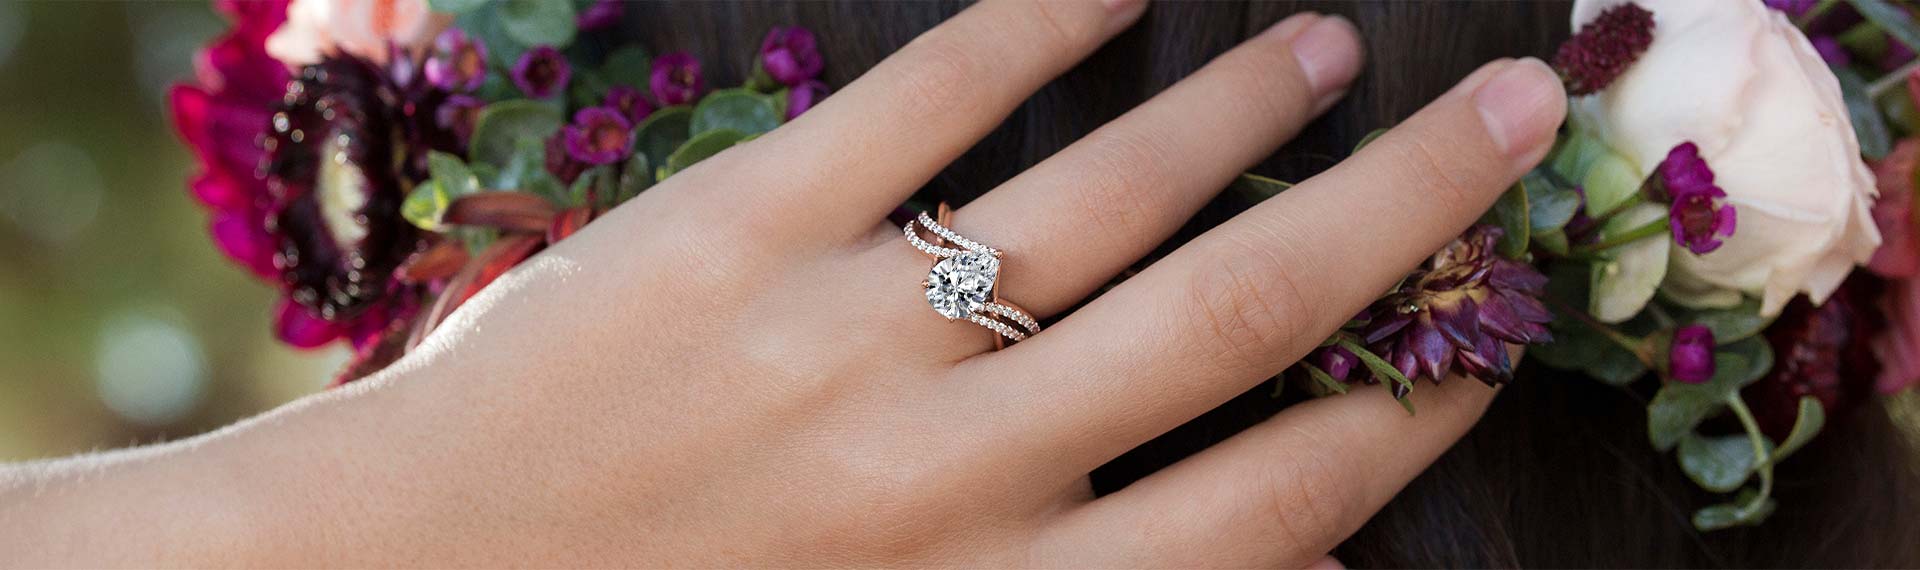 Woman wearing a diamond engagement ring with plants in the background